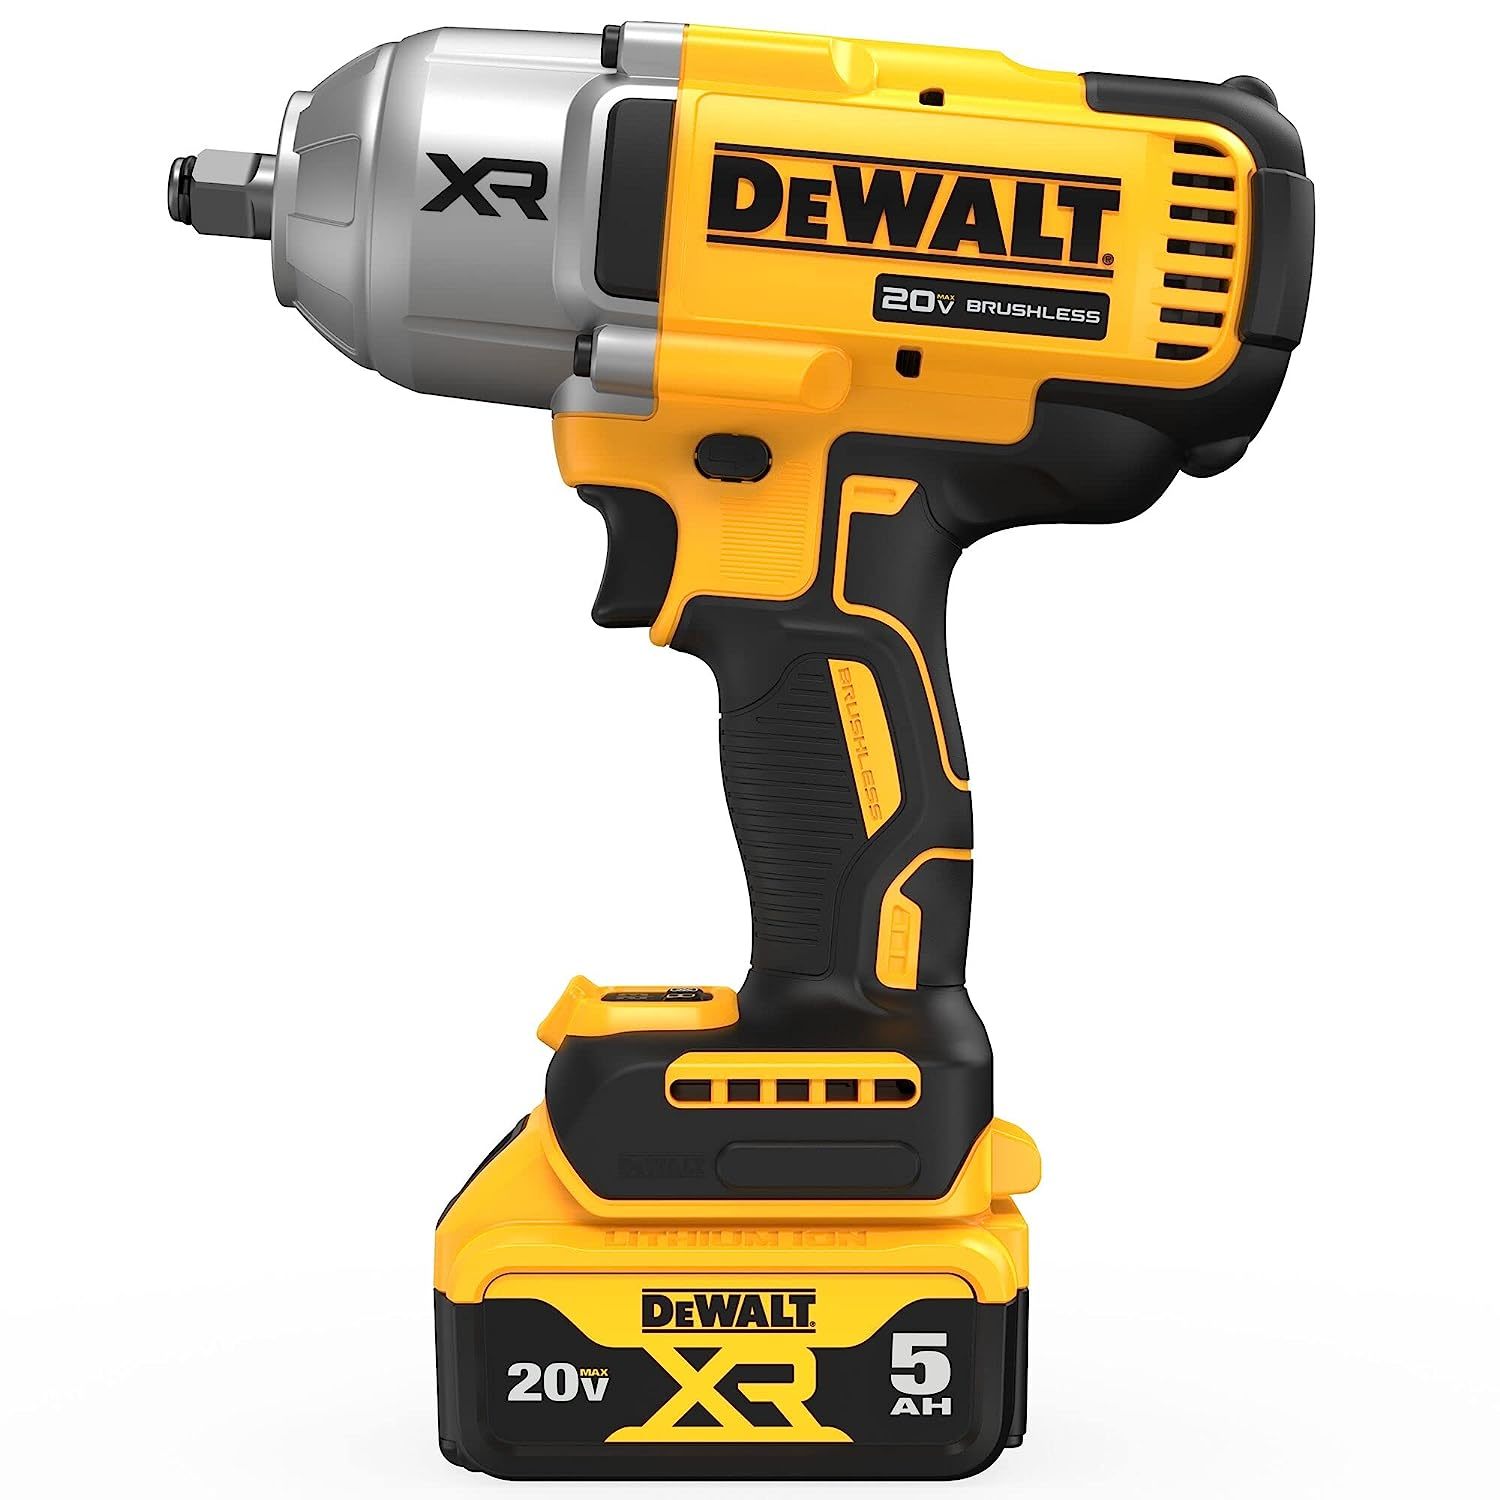 Primary image for DEWALT 20V MAX XR 1/2 in. High Torque Impact Wrench with Hog Ring Anvil Kit (DCF